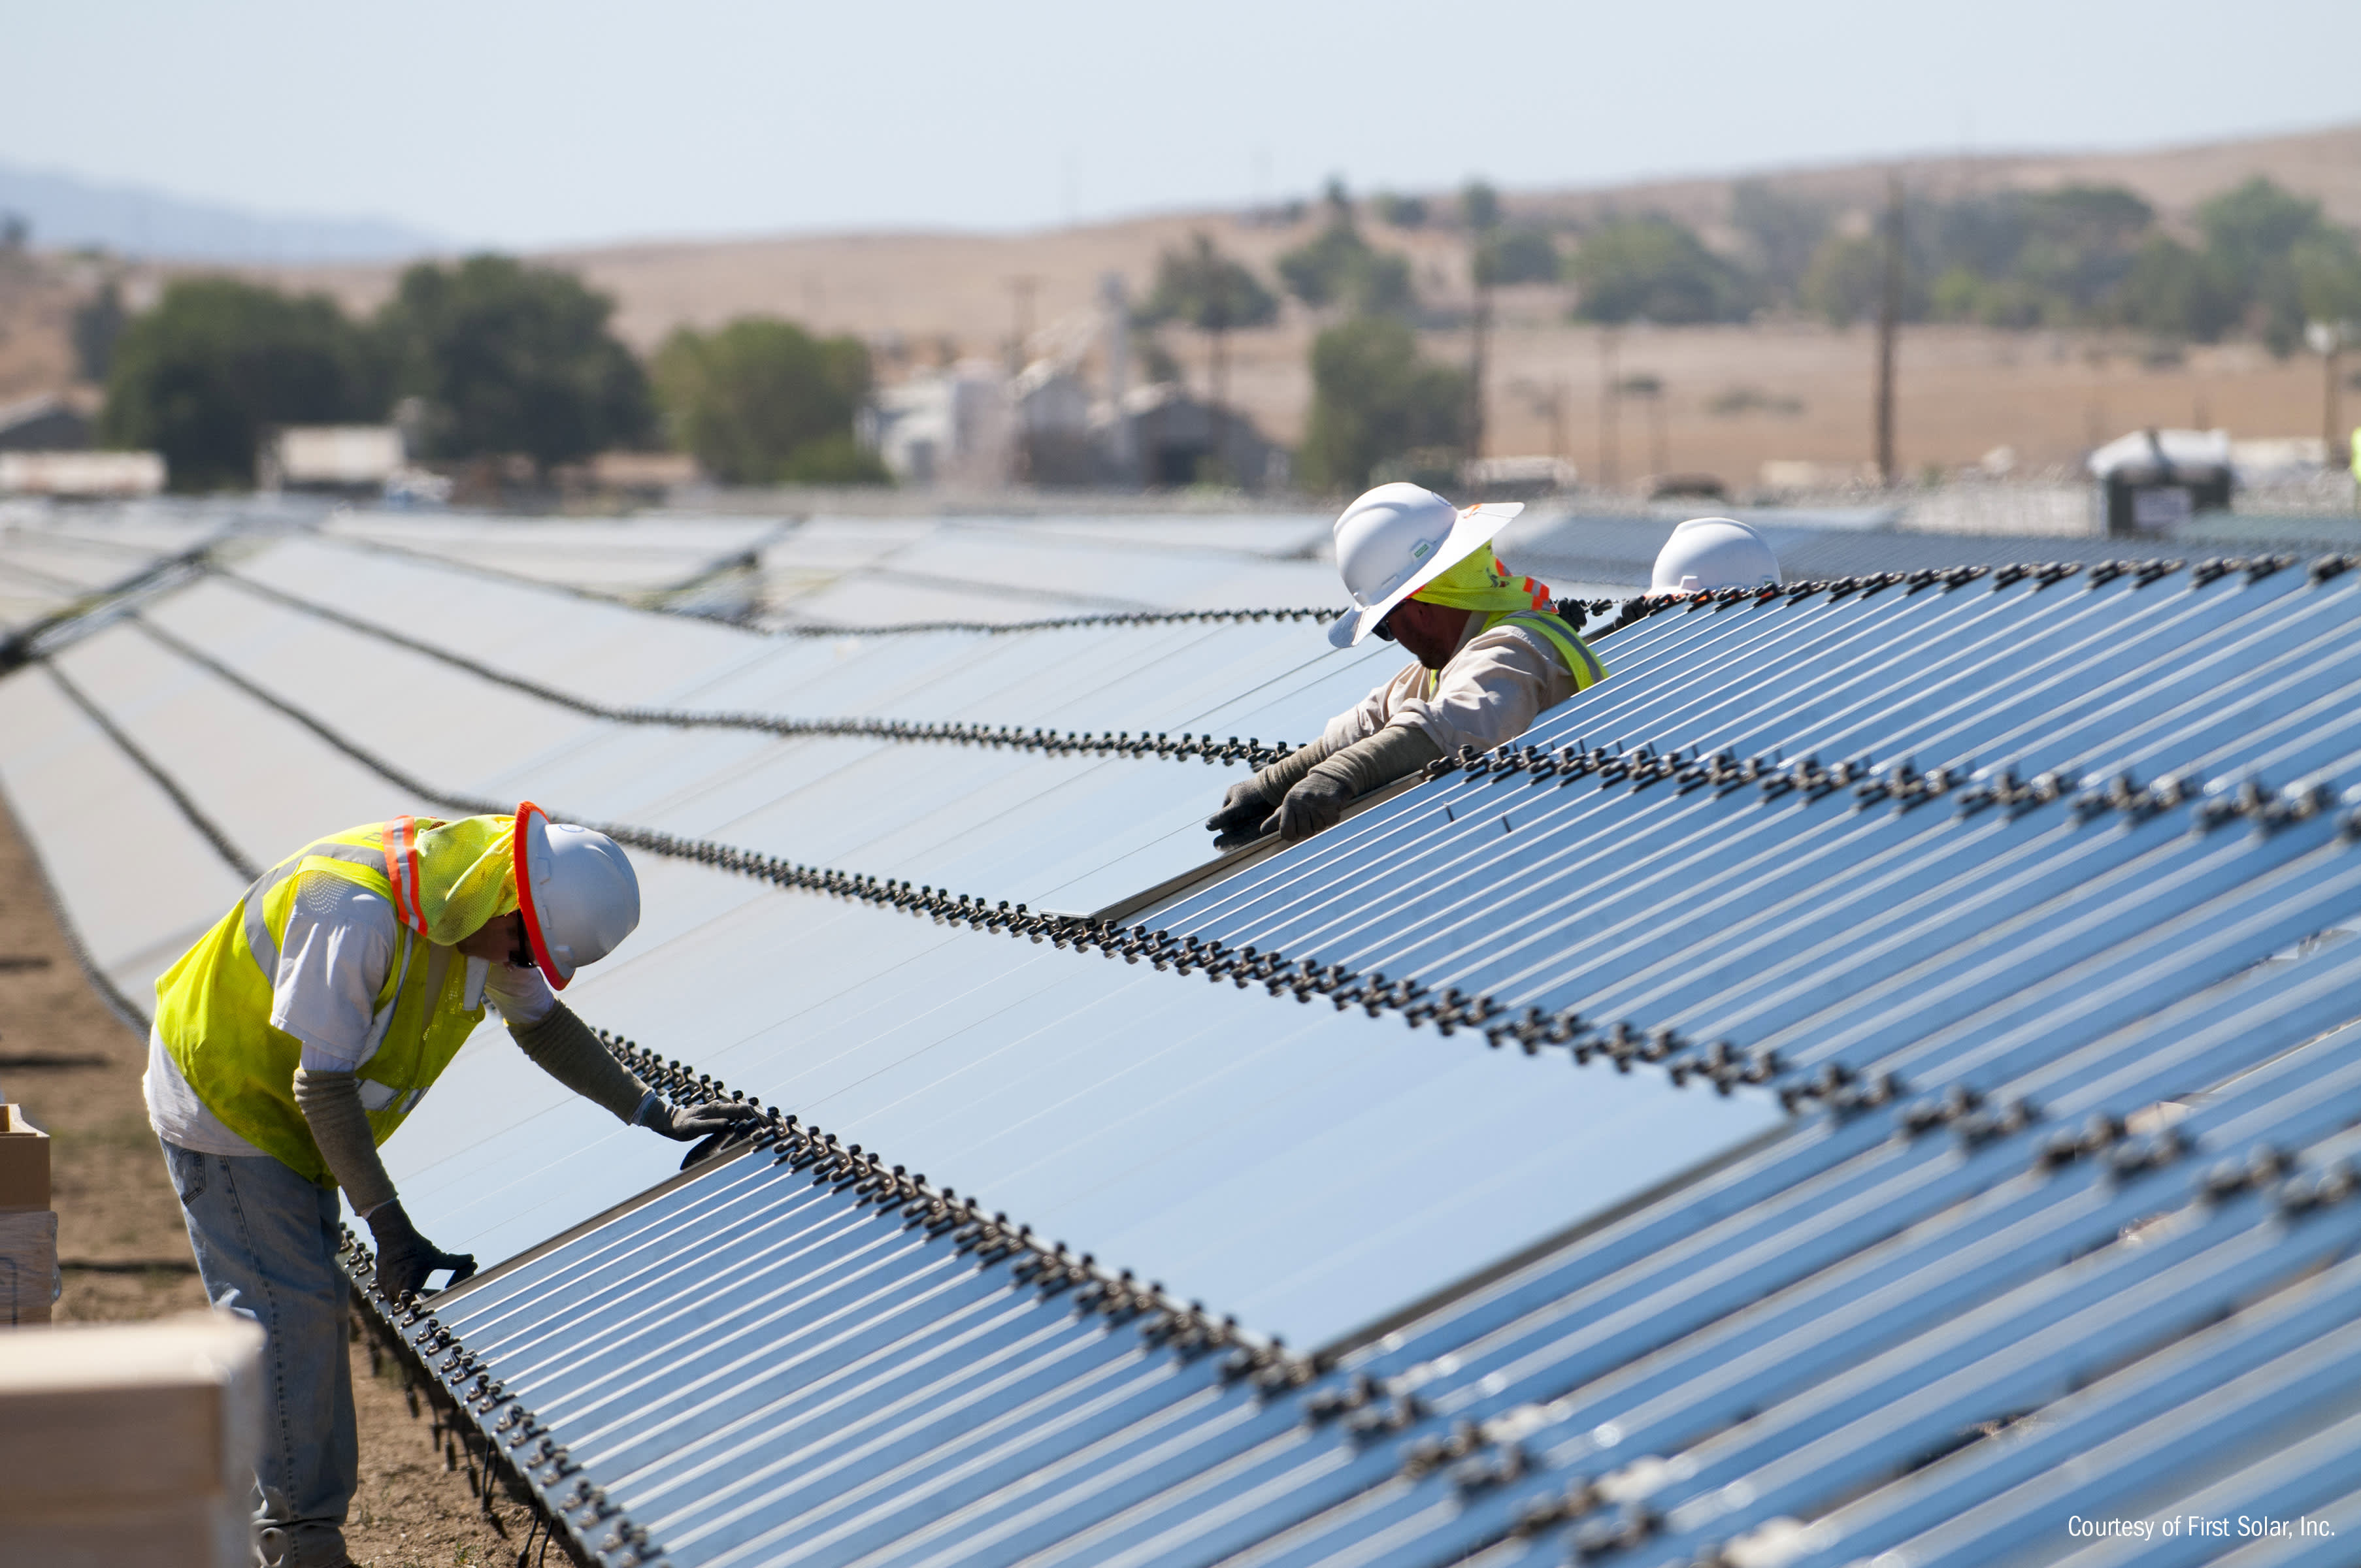 This solar energy stock could surge nearly 50%, says Goldman